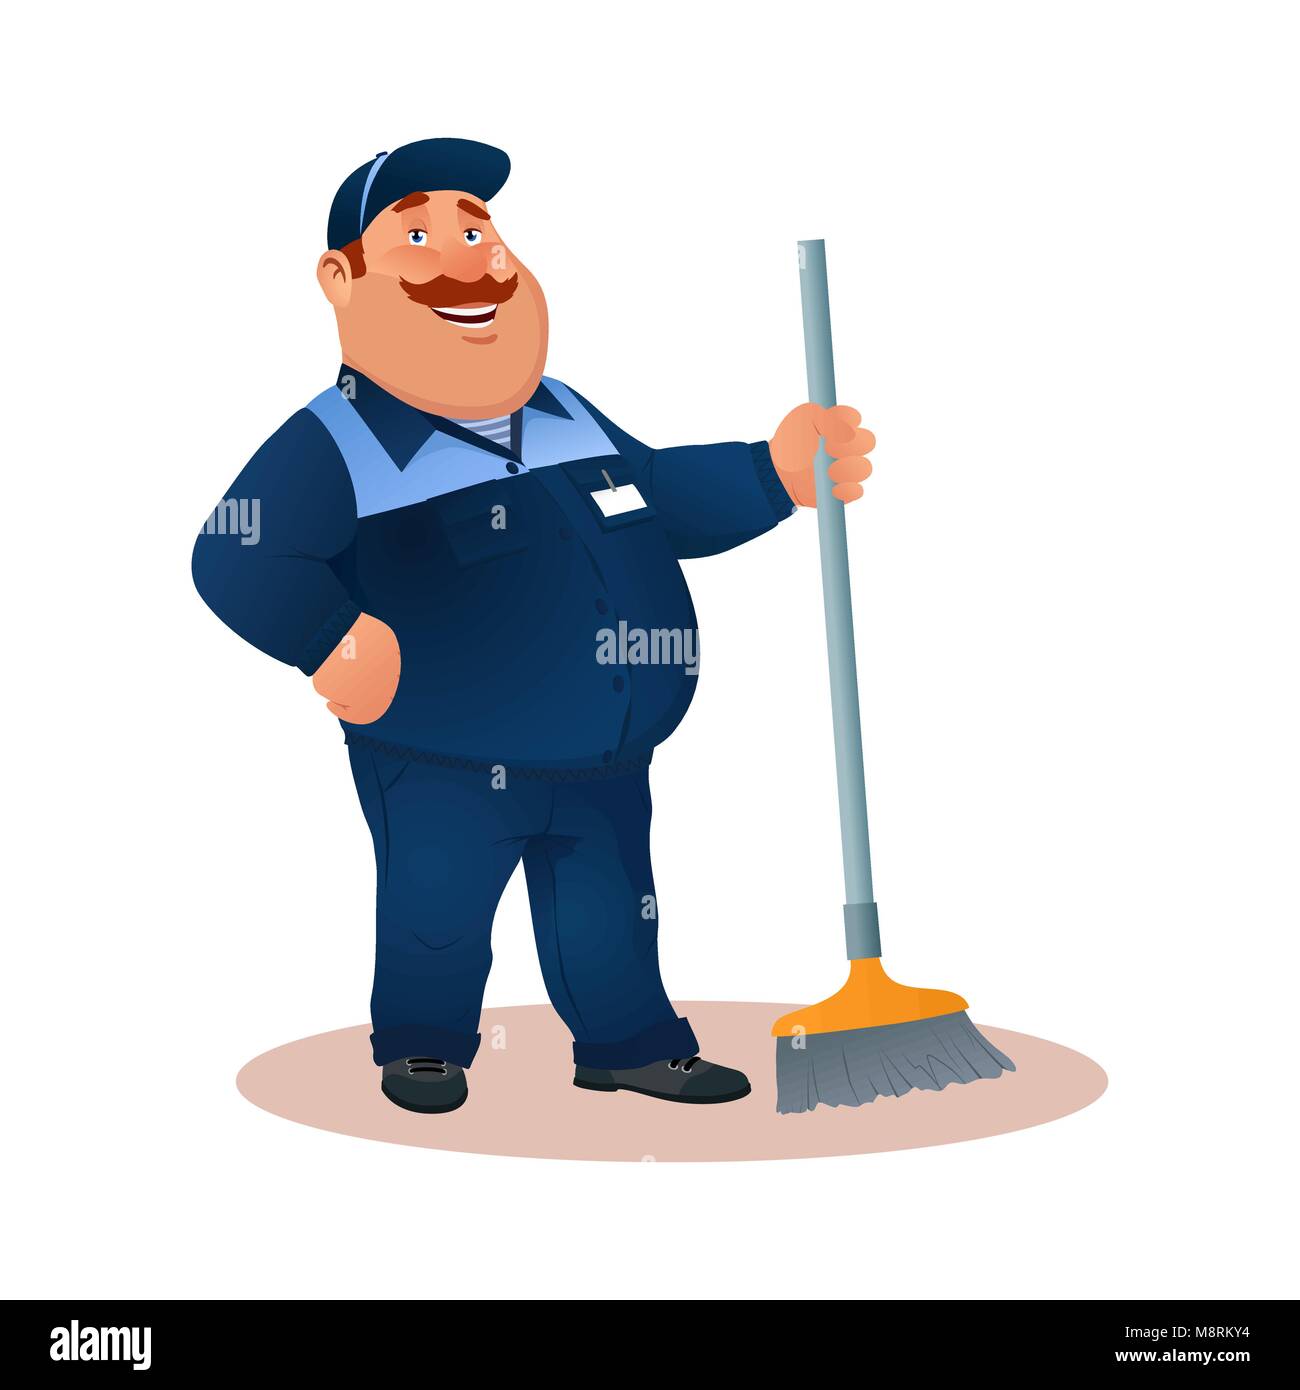 Smiling cartoon janitor with mop. Funny fat character in blue suit with broom. Happy flat cleaner in uniform from janitorial service or office cleaning. Colorful vector illustration. Stock Vector